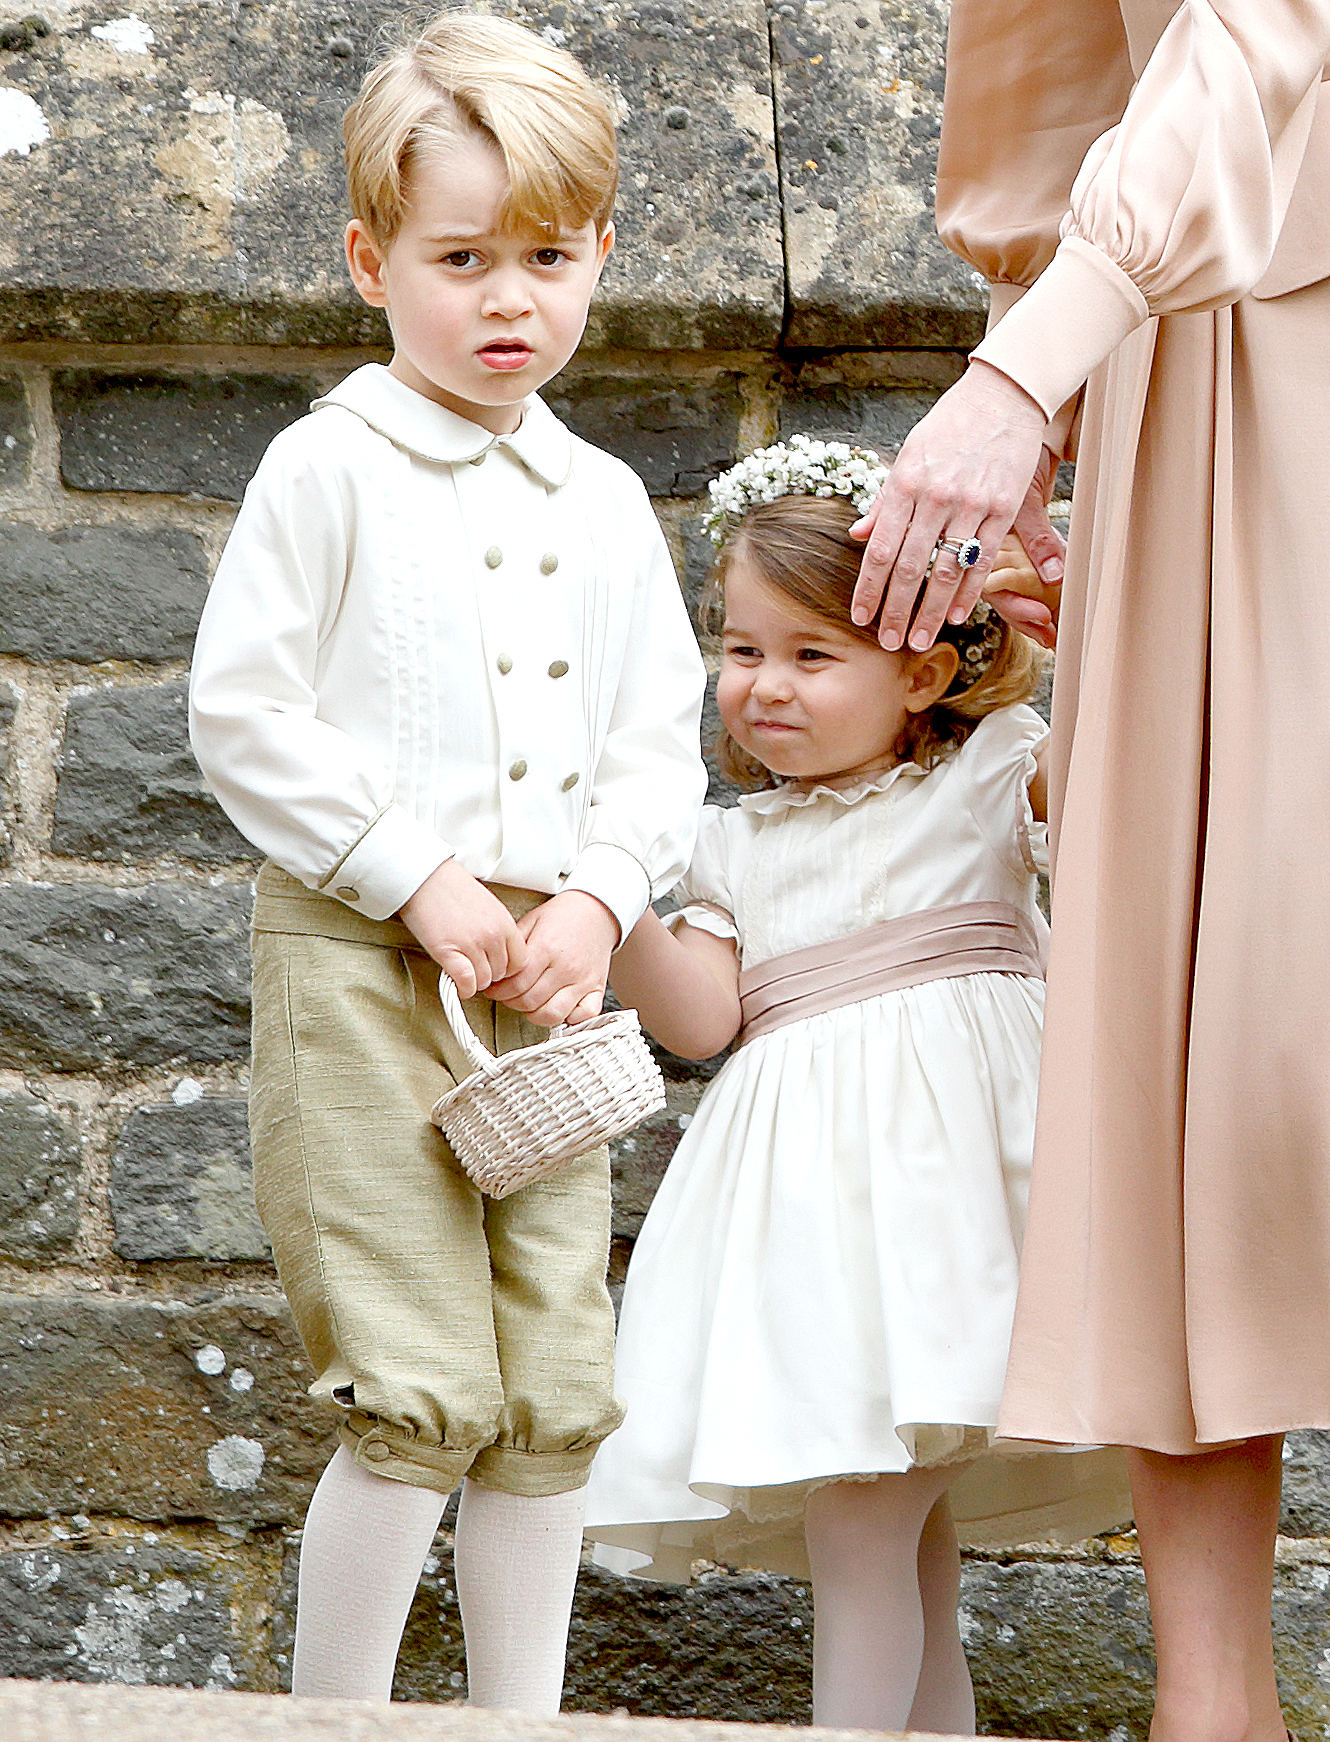 Prince-George-and-Princess-Charlotte-at-their-aunt-Pippa-Middleton’s-2017-wedding